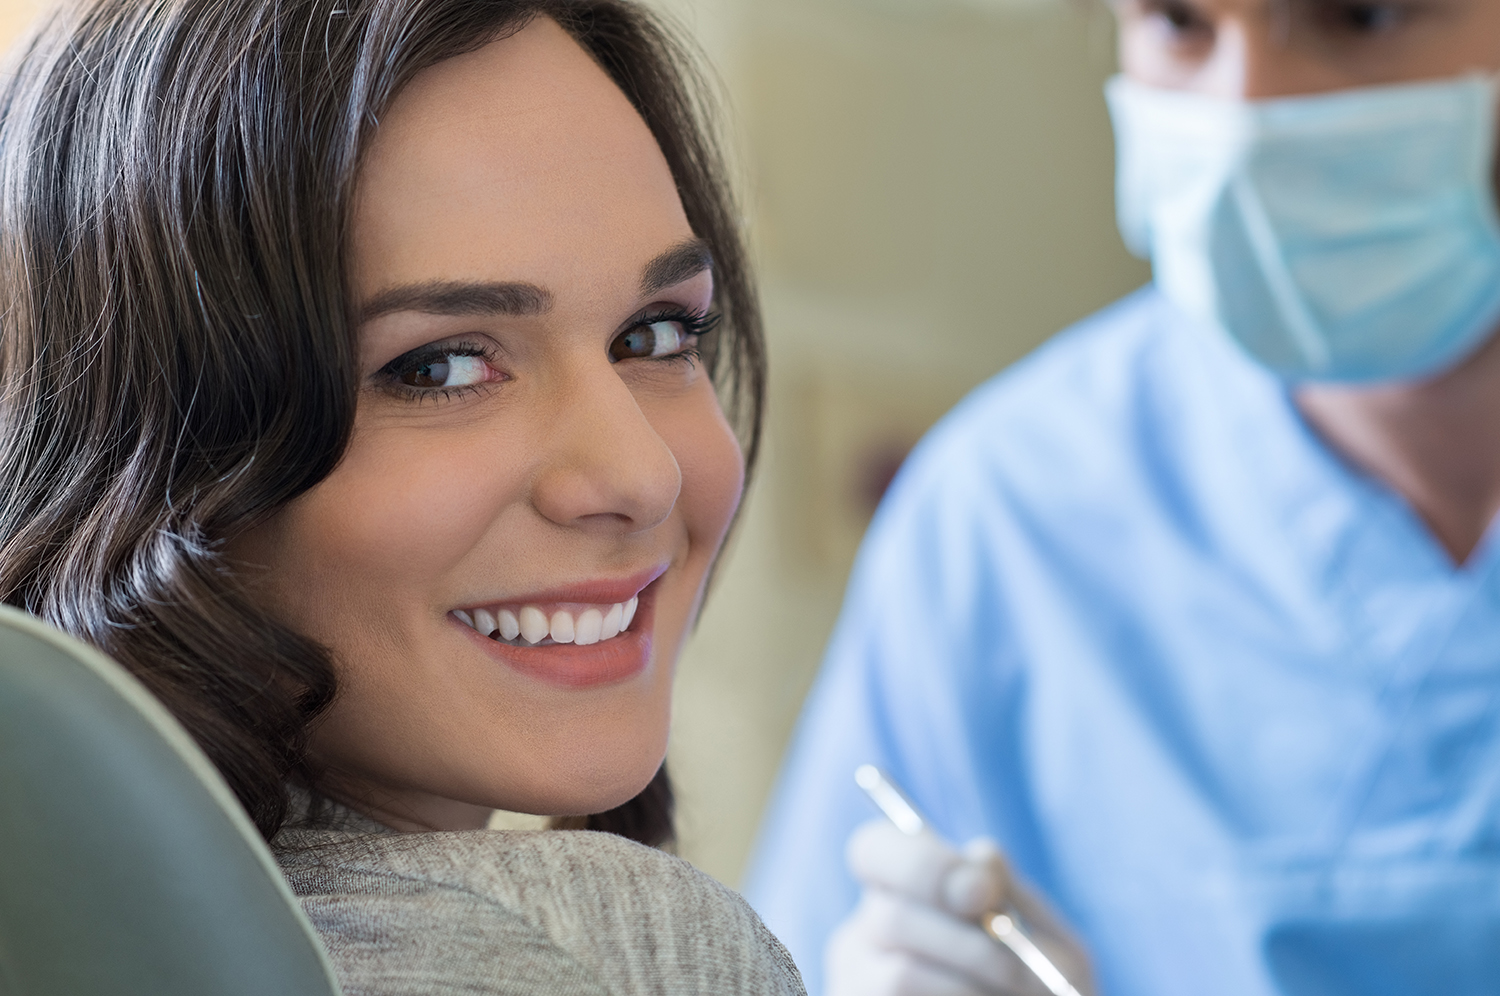 Beautify Your Smile by Choosing Elgin Family Dentist